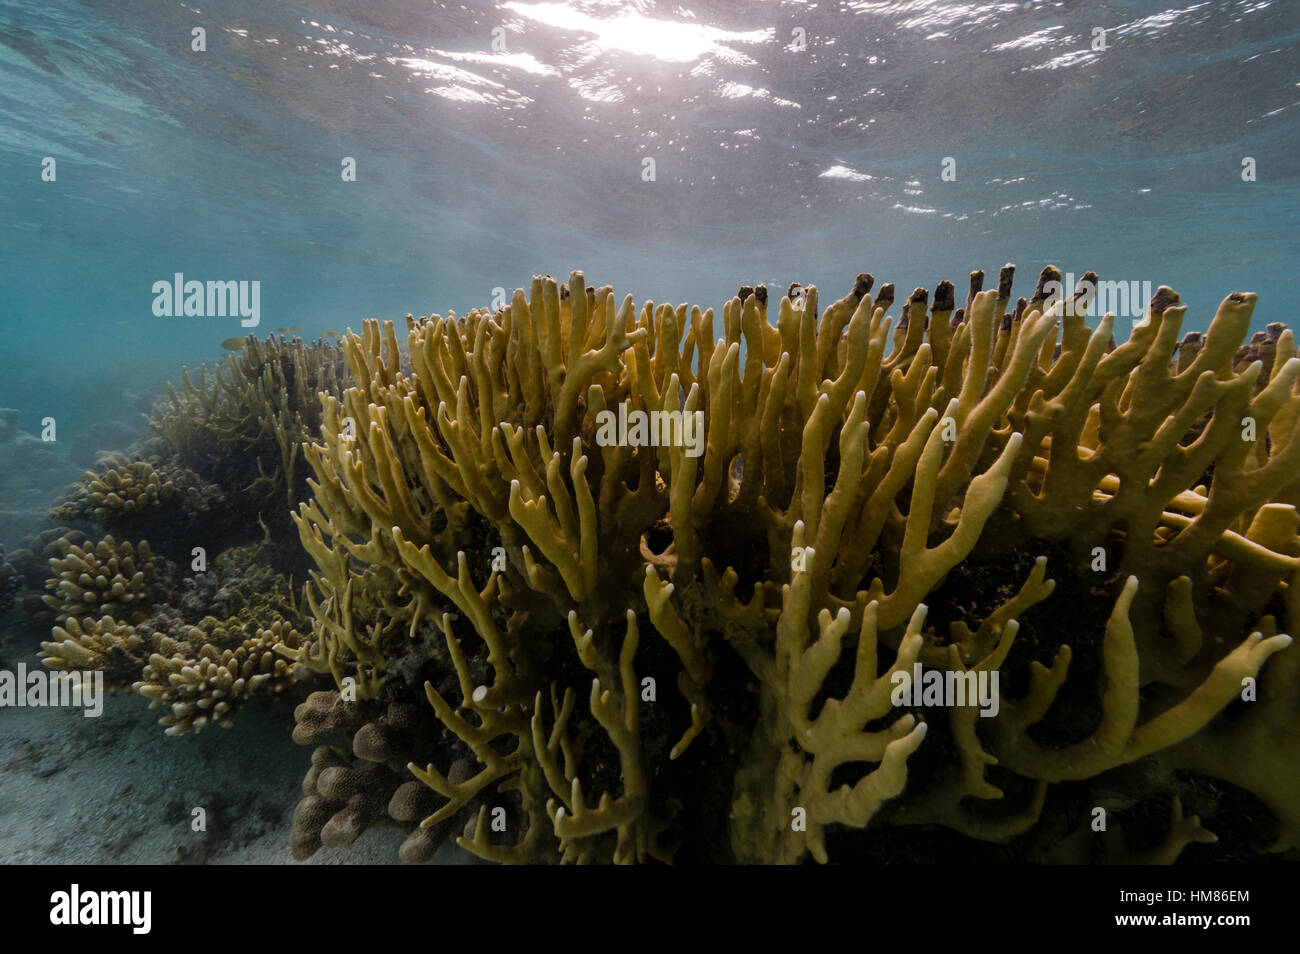 Dappled sunlight falling on a Fire Coral colony in shallow tropical seas. Stock Photo